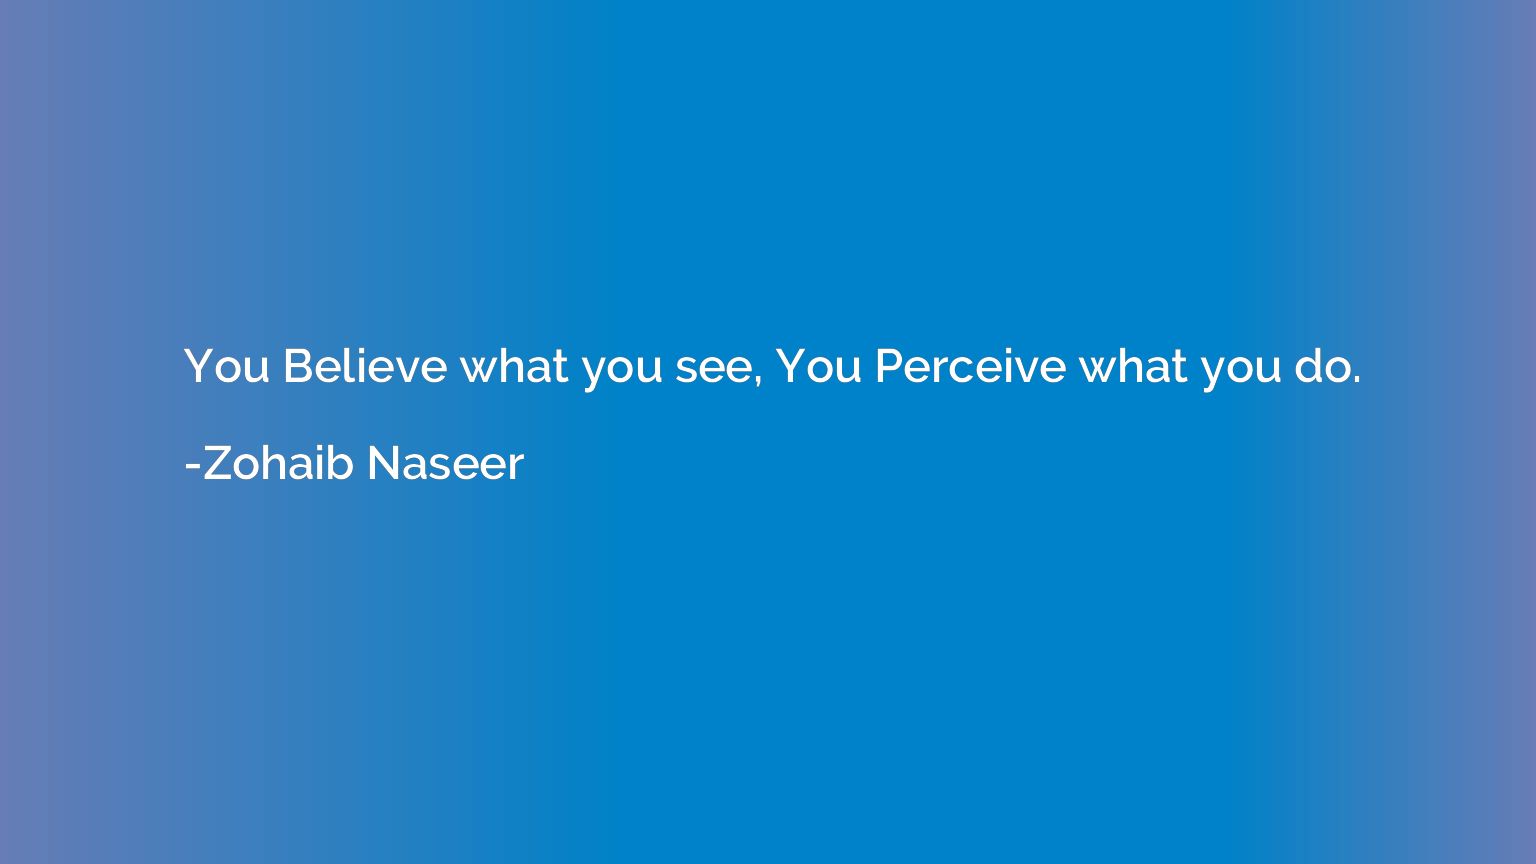 You Believe what you see, You Perceive what you do.